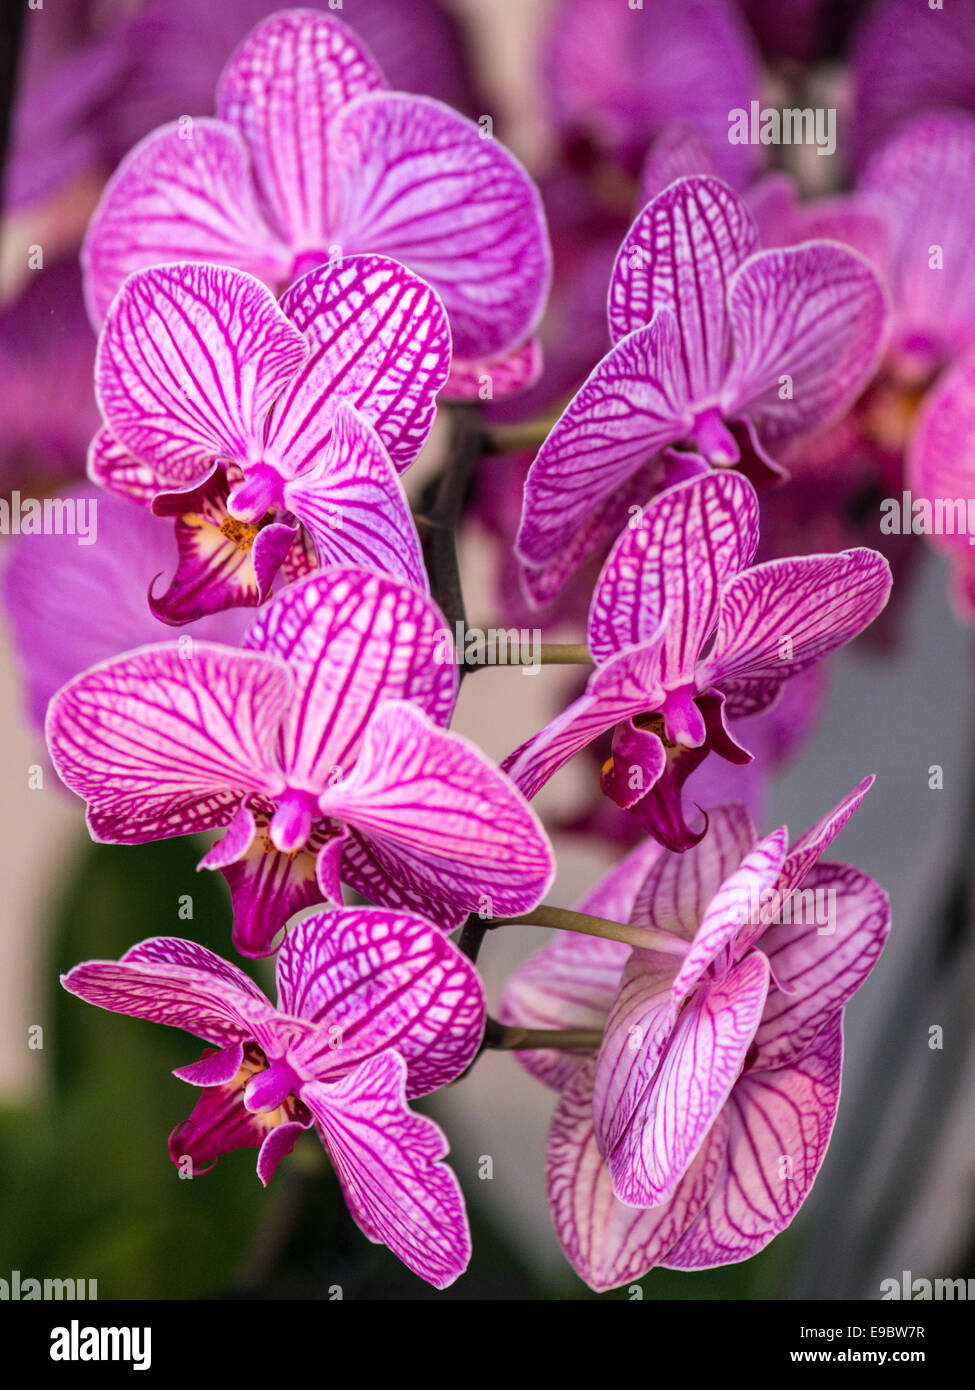 Orchid vivid mauve with striped white petals, pink column, throat and lip. Stock Photo